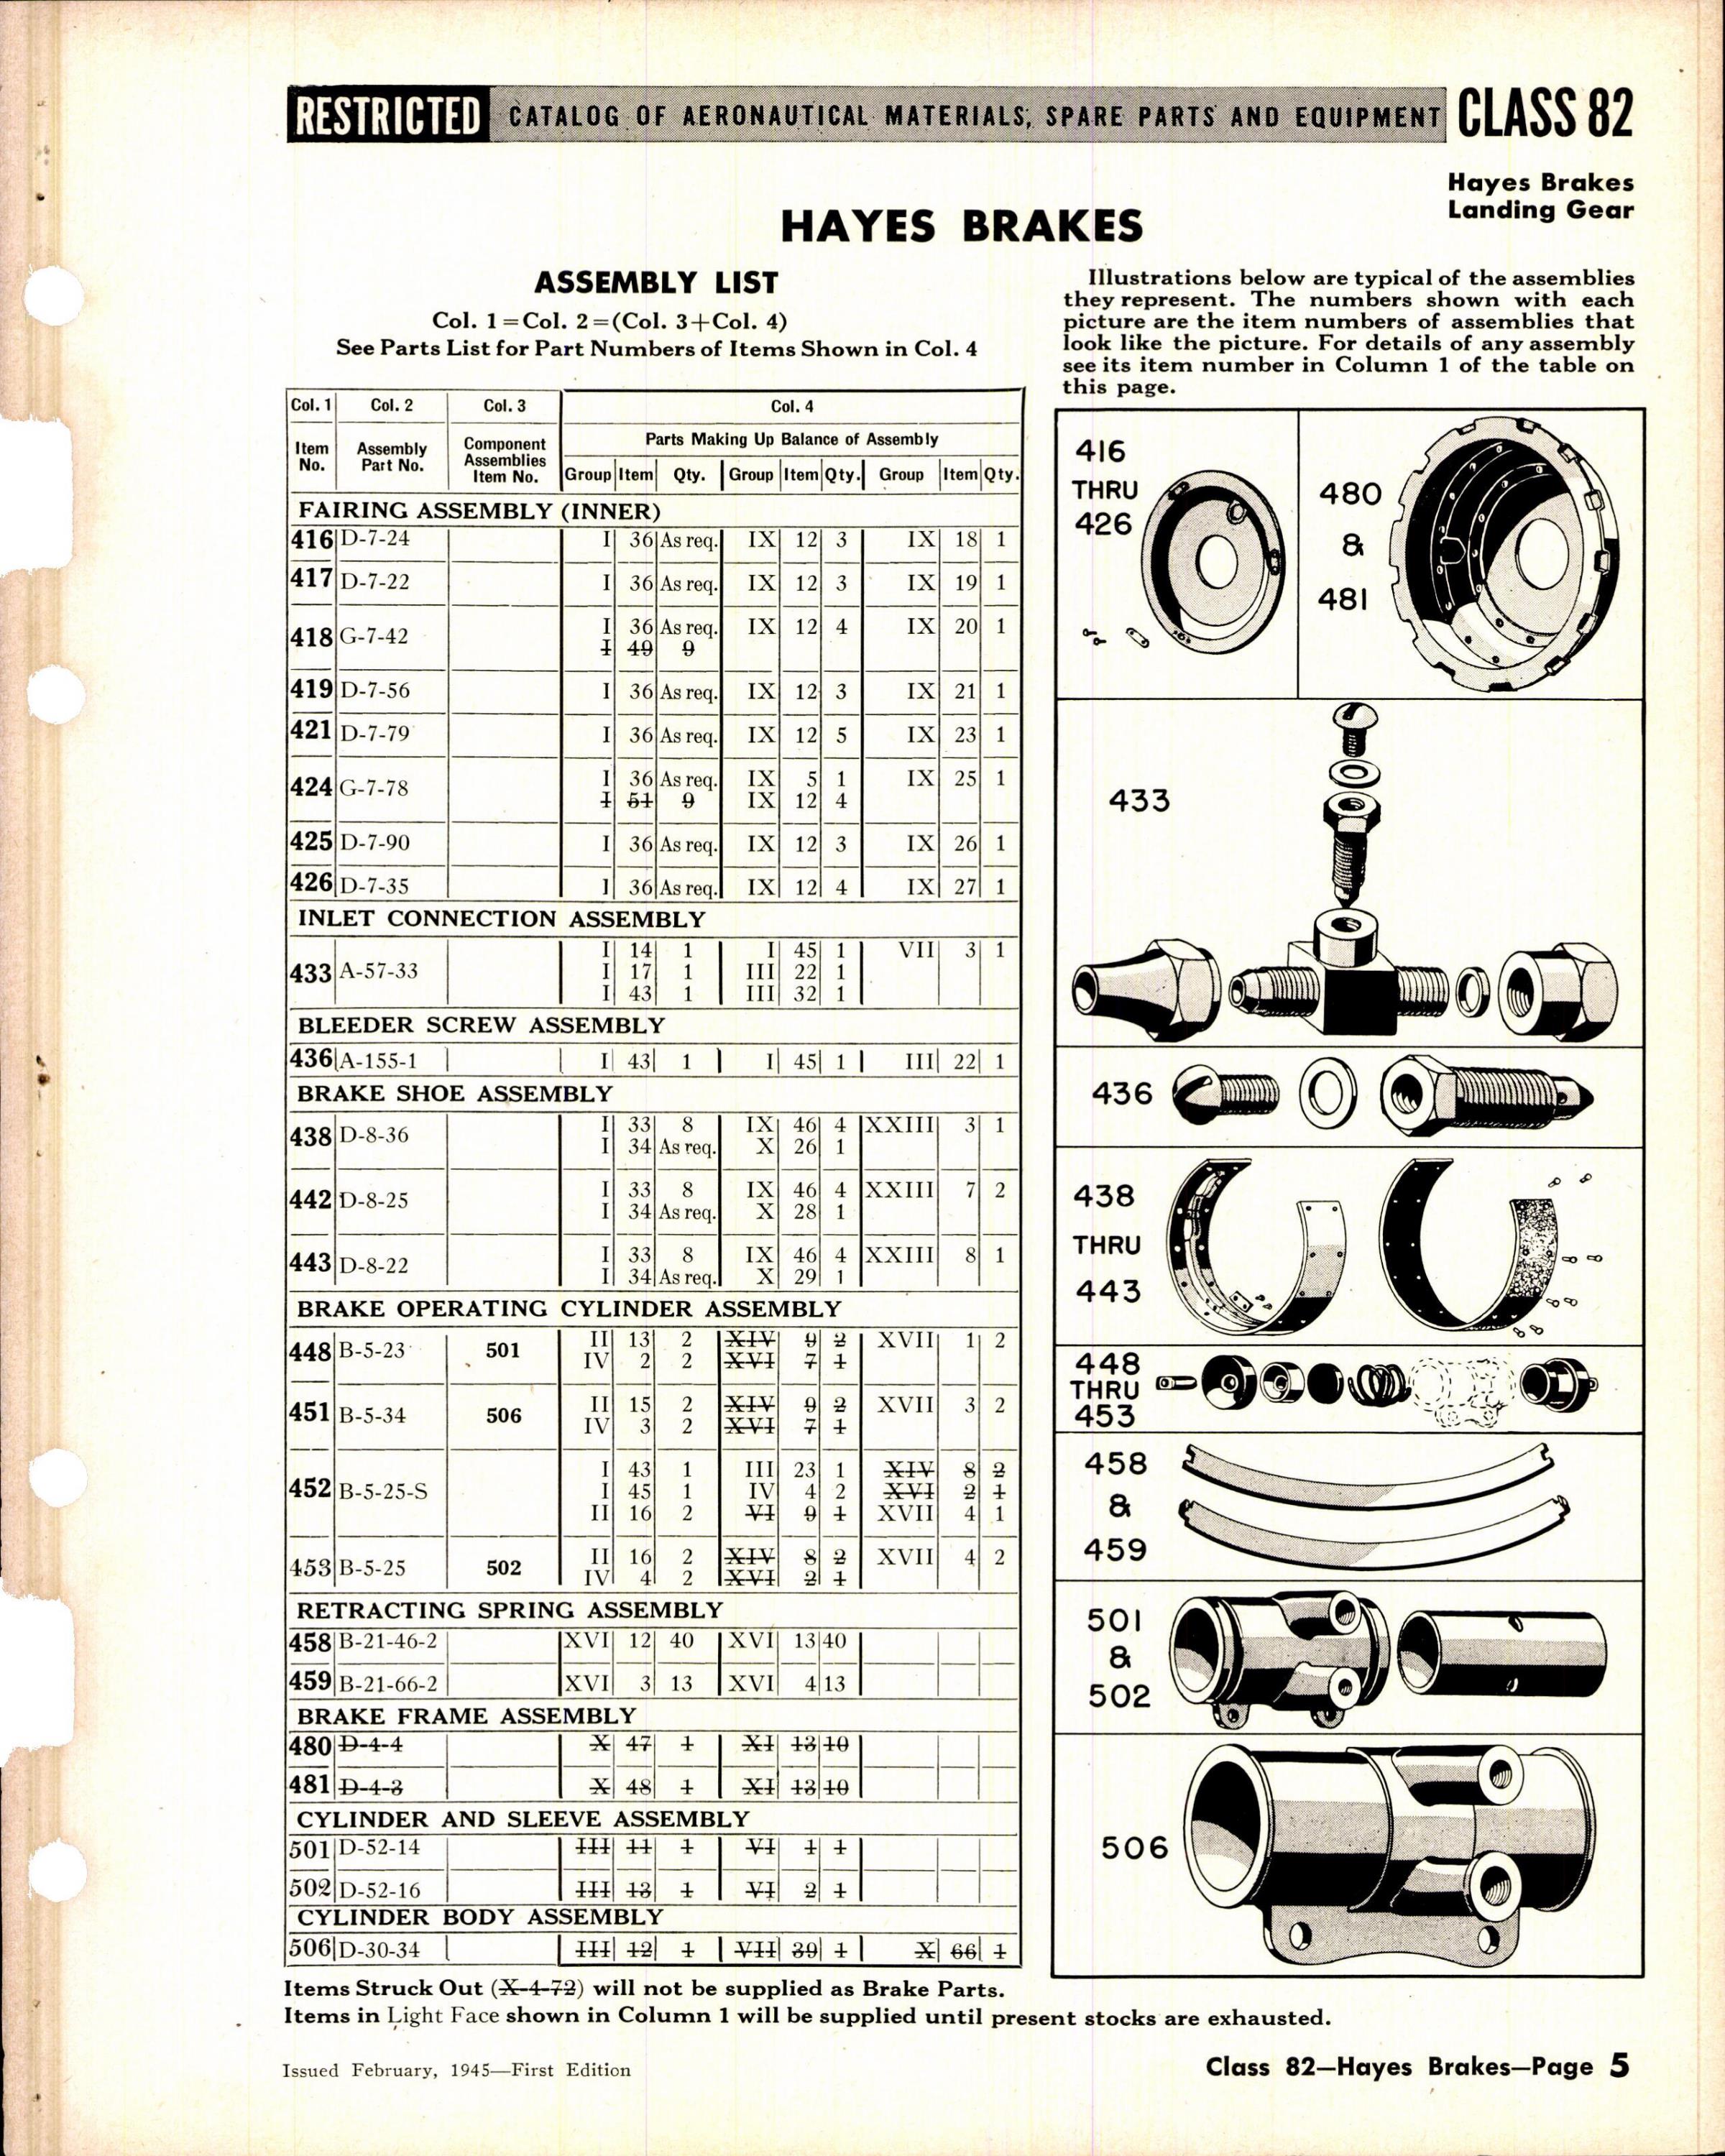 Sample page 5 from AirCorps Library document: Hayes Brakes